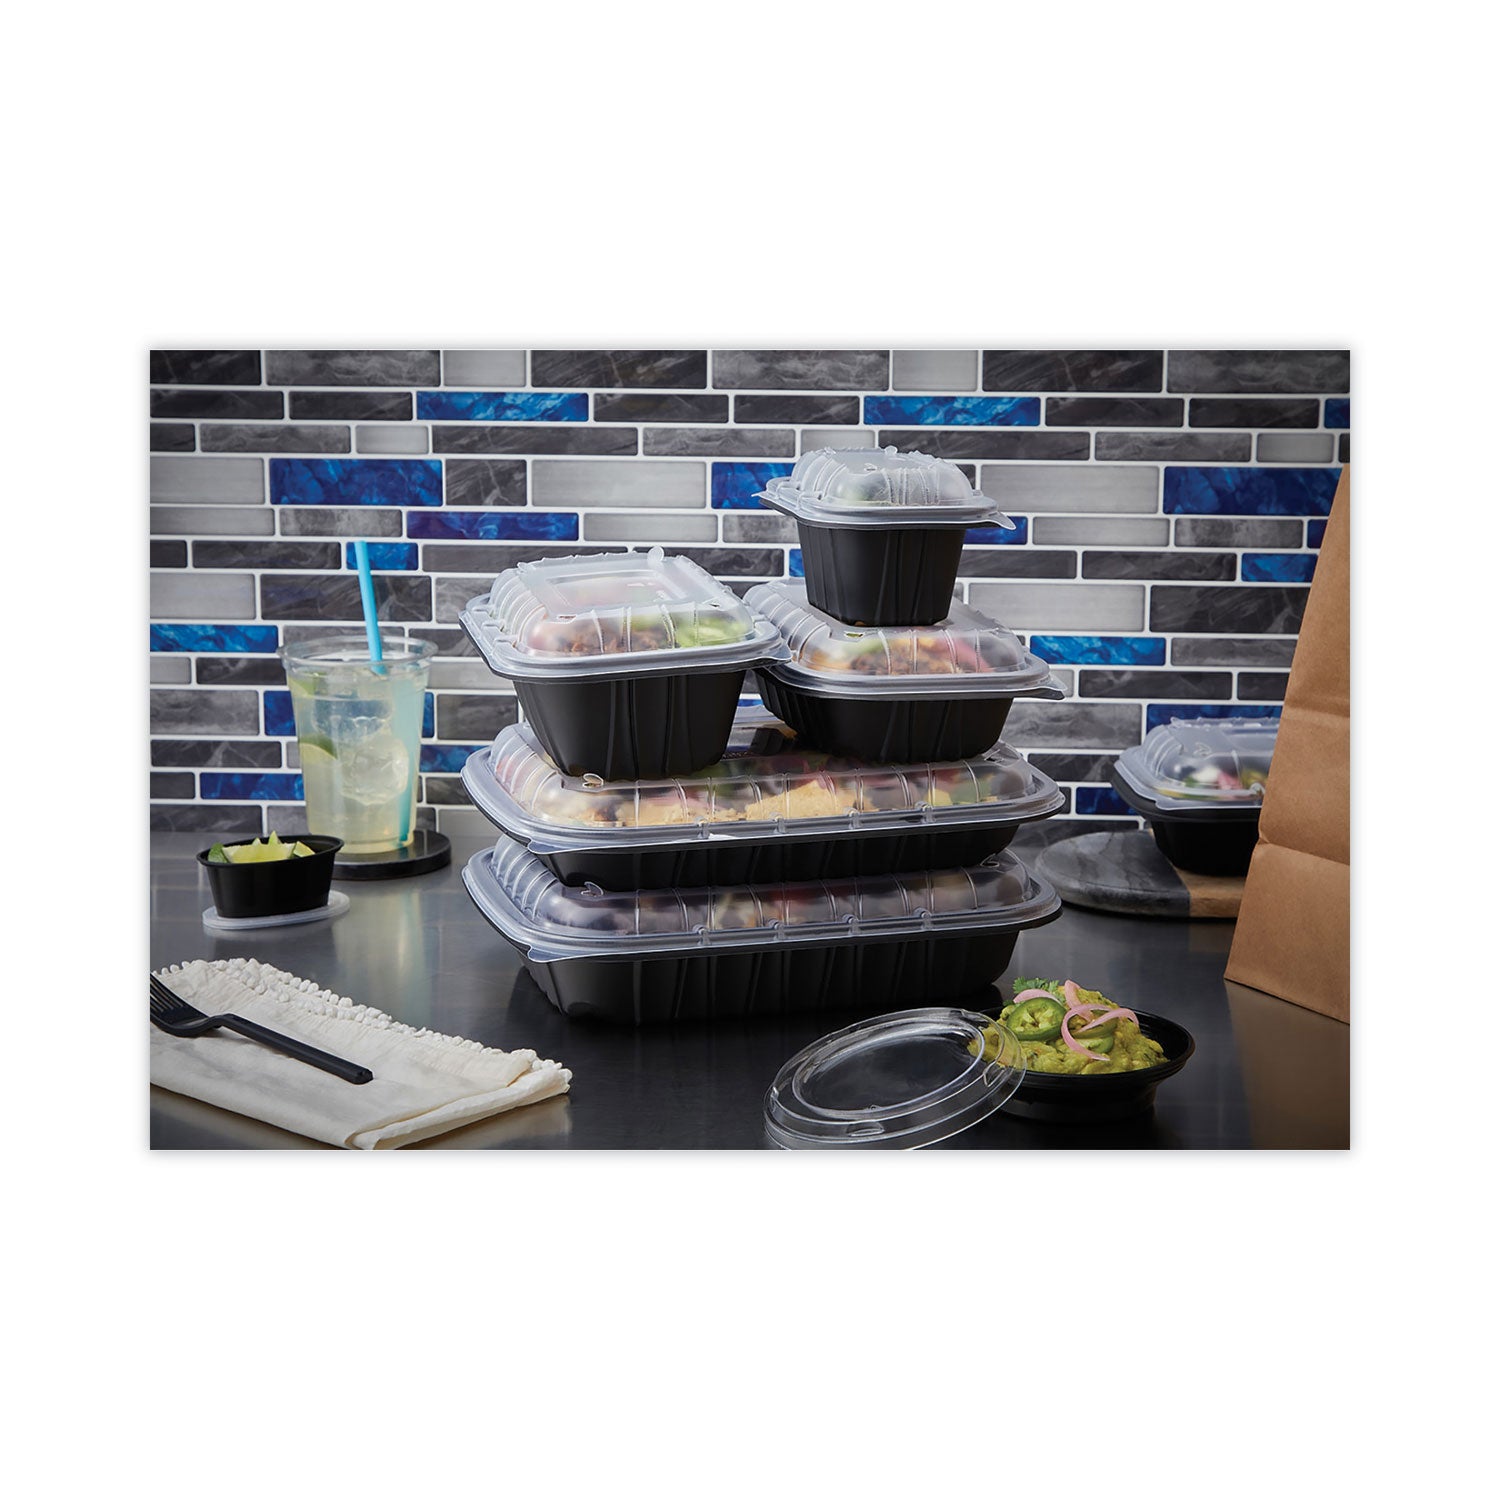 earthchoice-entree2go-takeout-container-64-oz-1175-x-875-x-213-black-plastic-200-carton_pctycnb12x96400 - 2